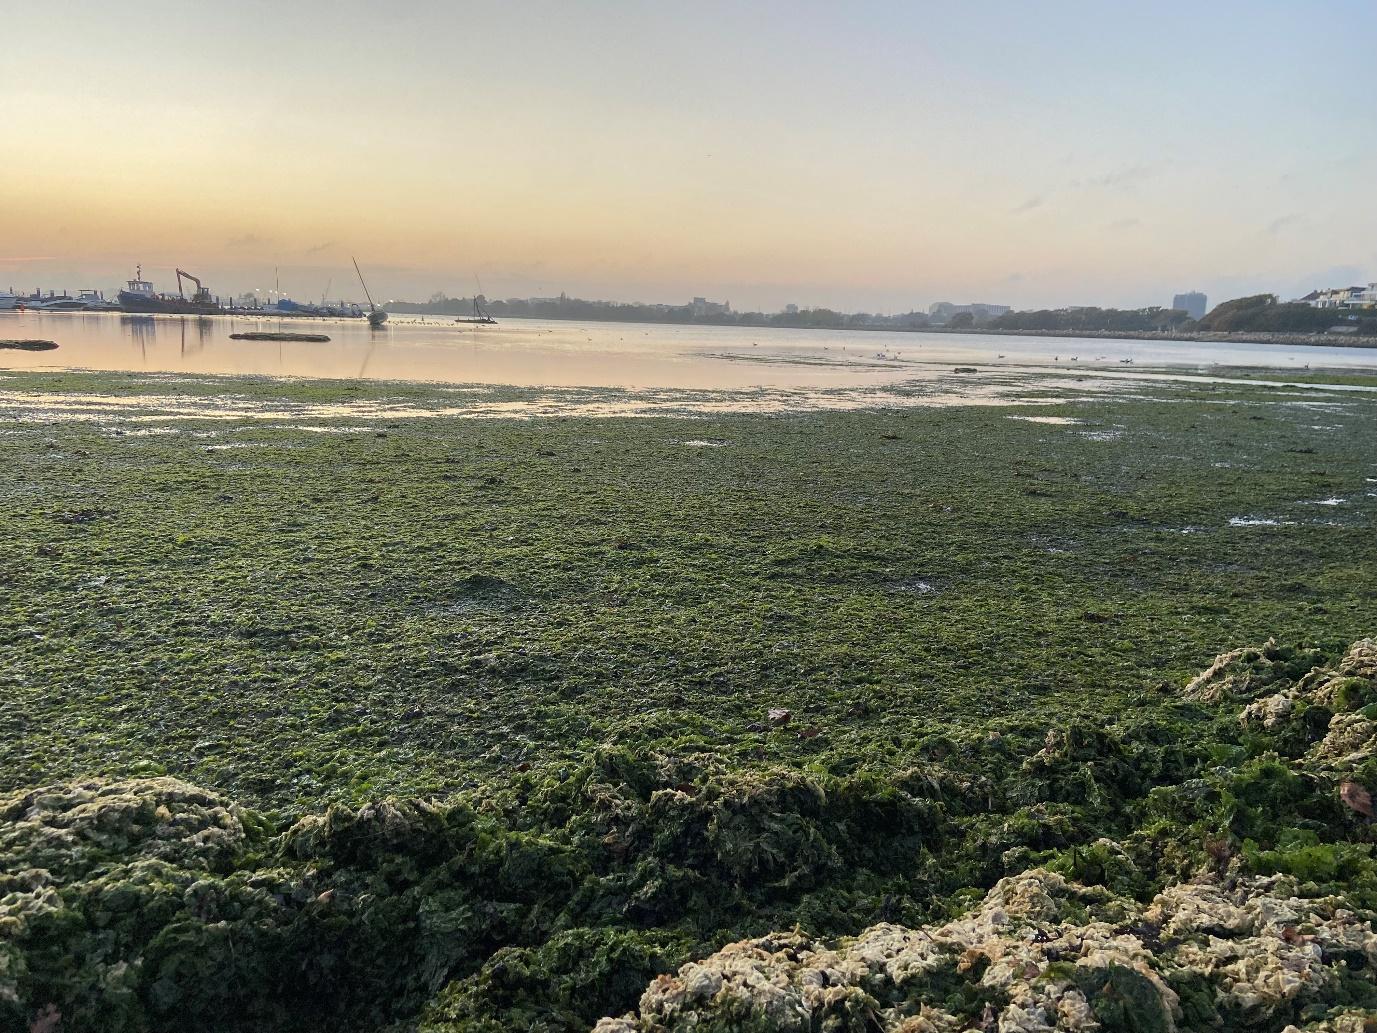 Macro algae smothering saltmarsh and mudflats in Poole Harbour as a result of excessive nutrients